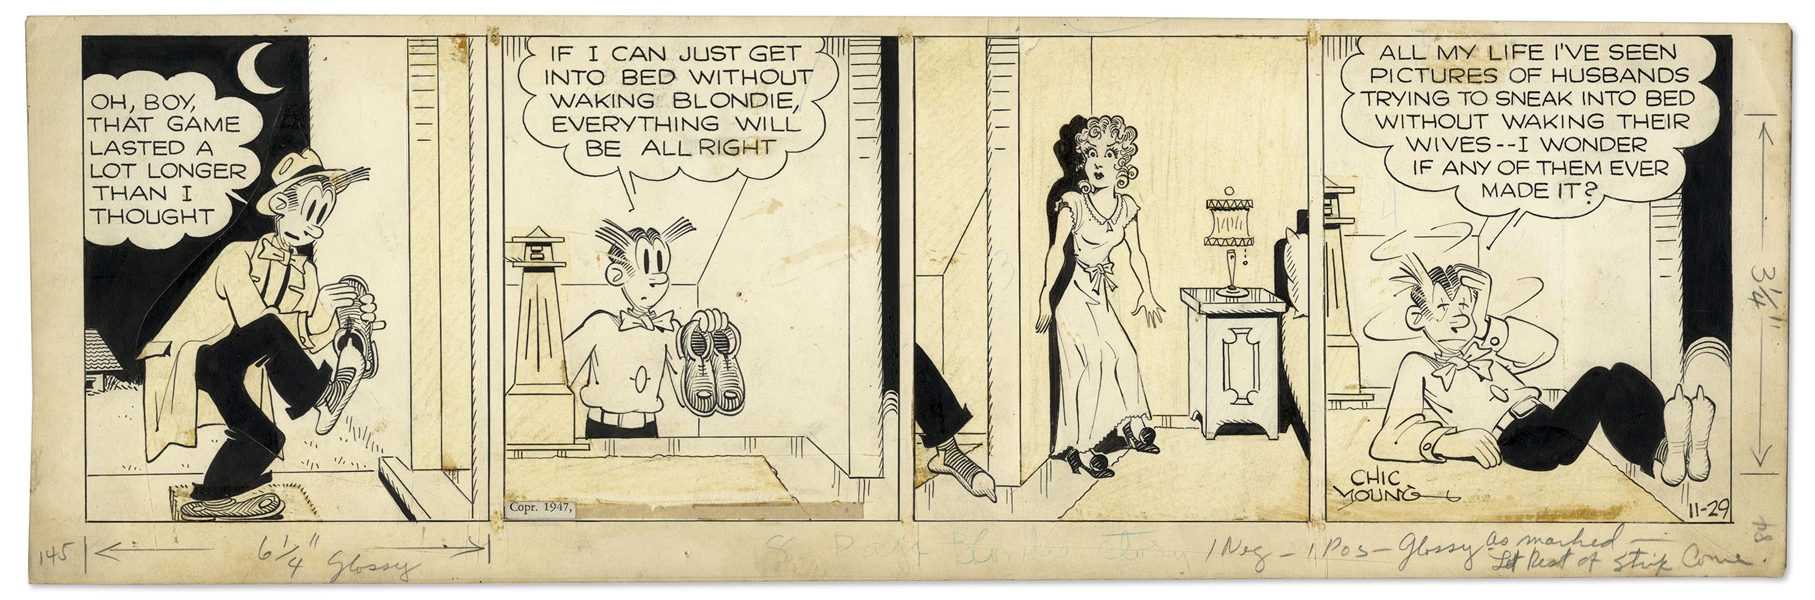 Chic Young Hand-Drawn ''Blondie'' Comic Strip From 1947 Featuring Blondie & Dagwood -- Titled, ''Another Indian Bites The Dust!''